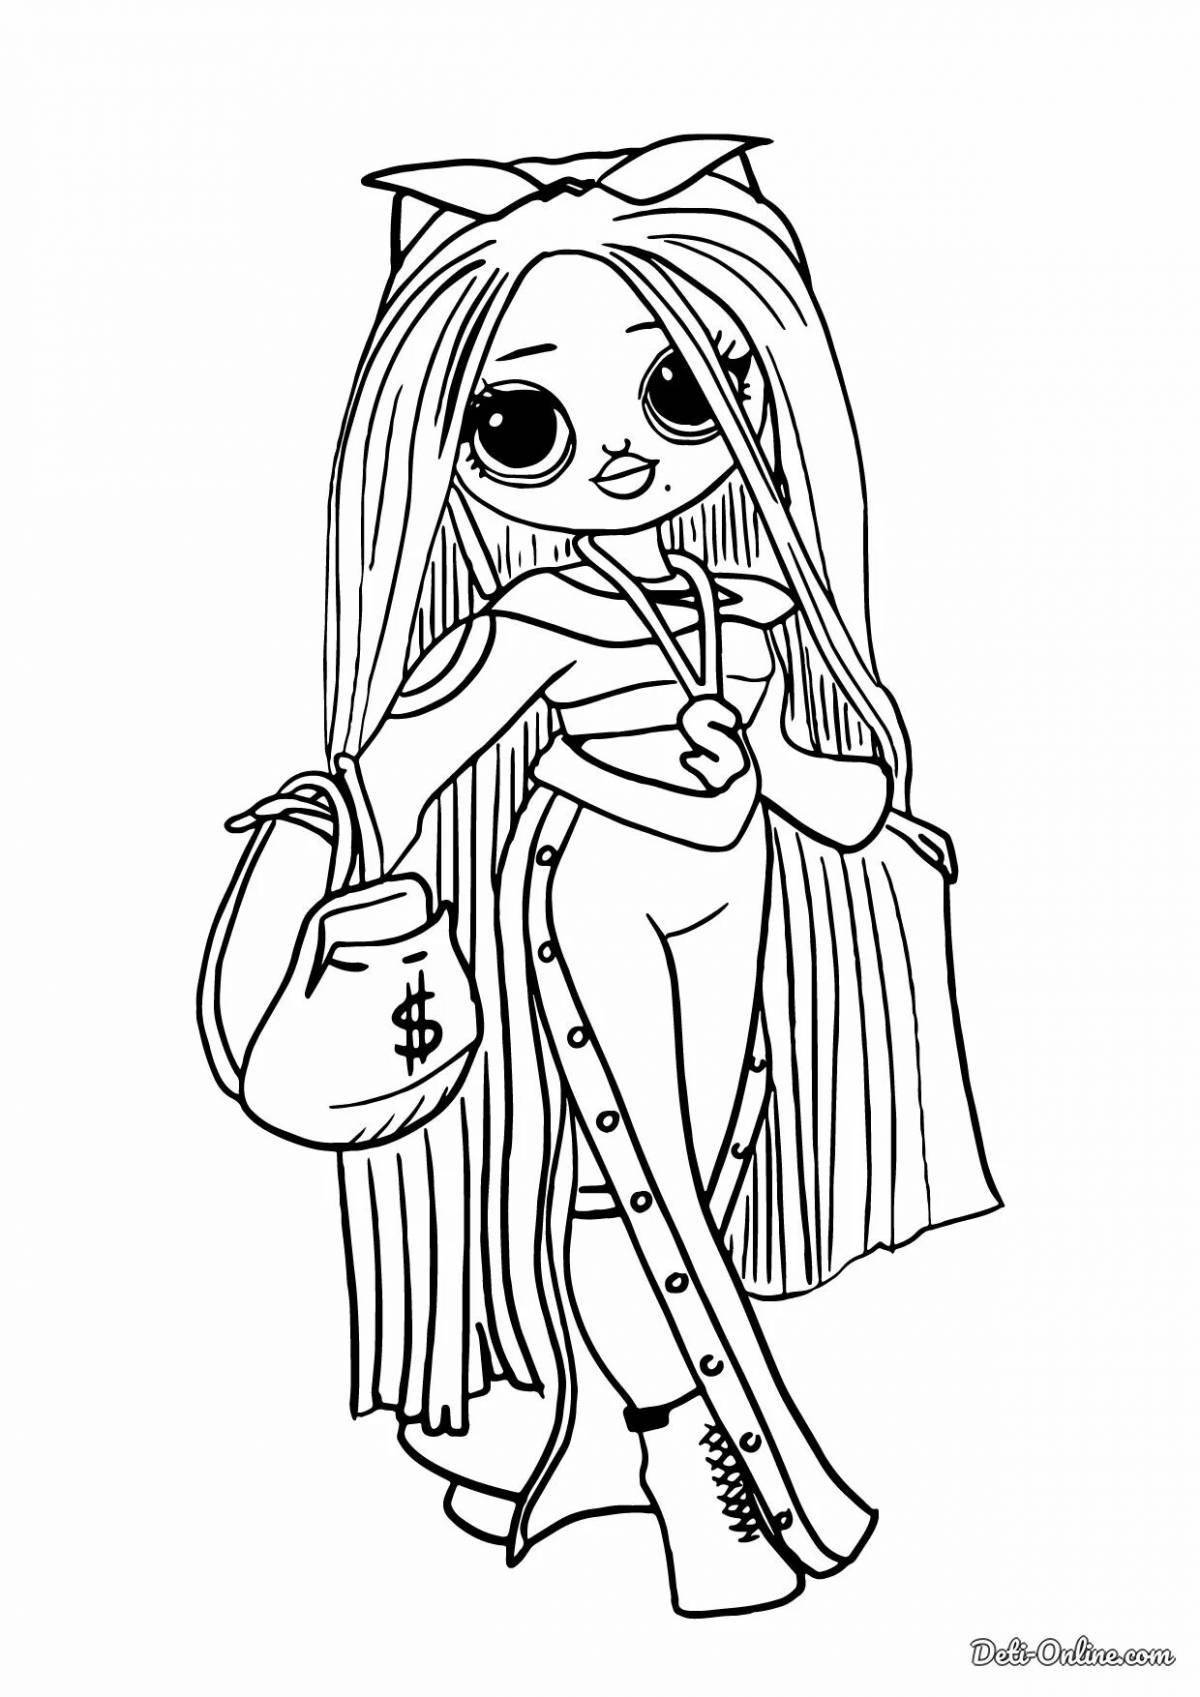 Adorable doll lol teen coloring page